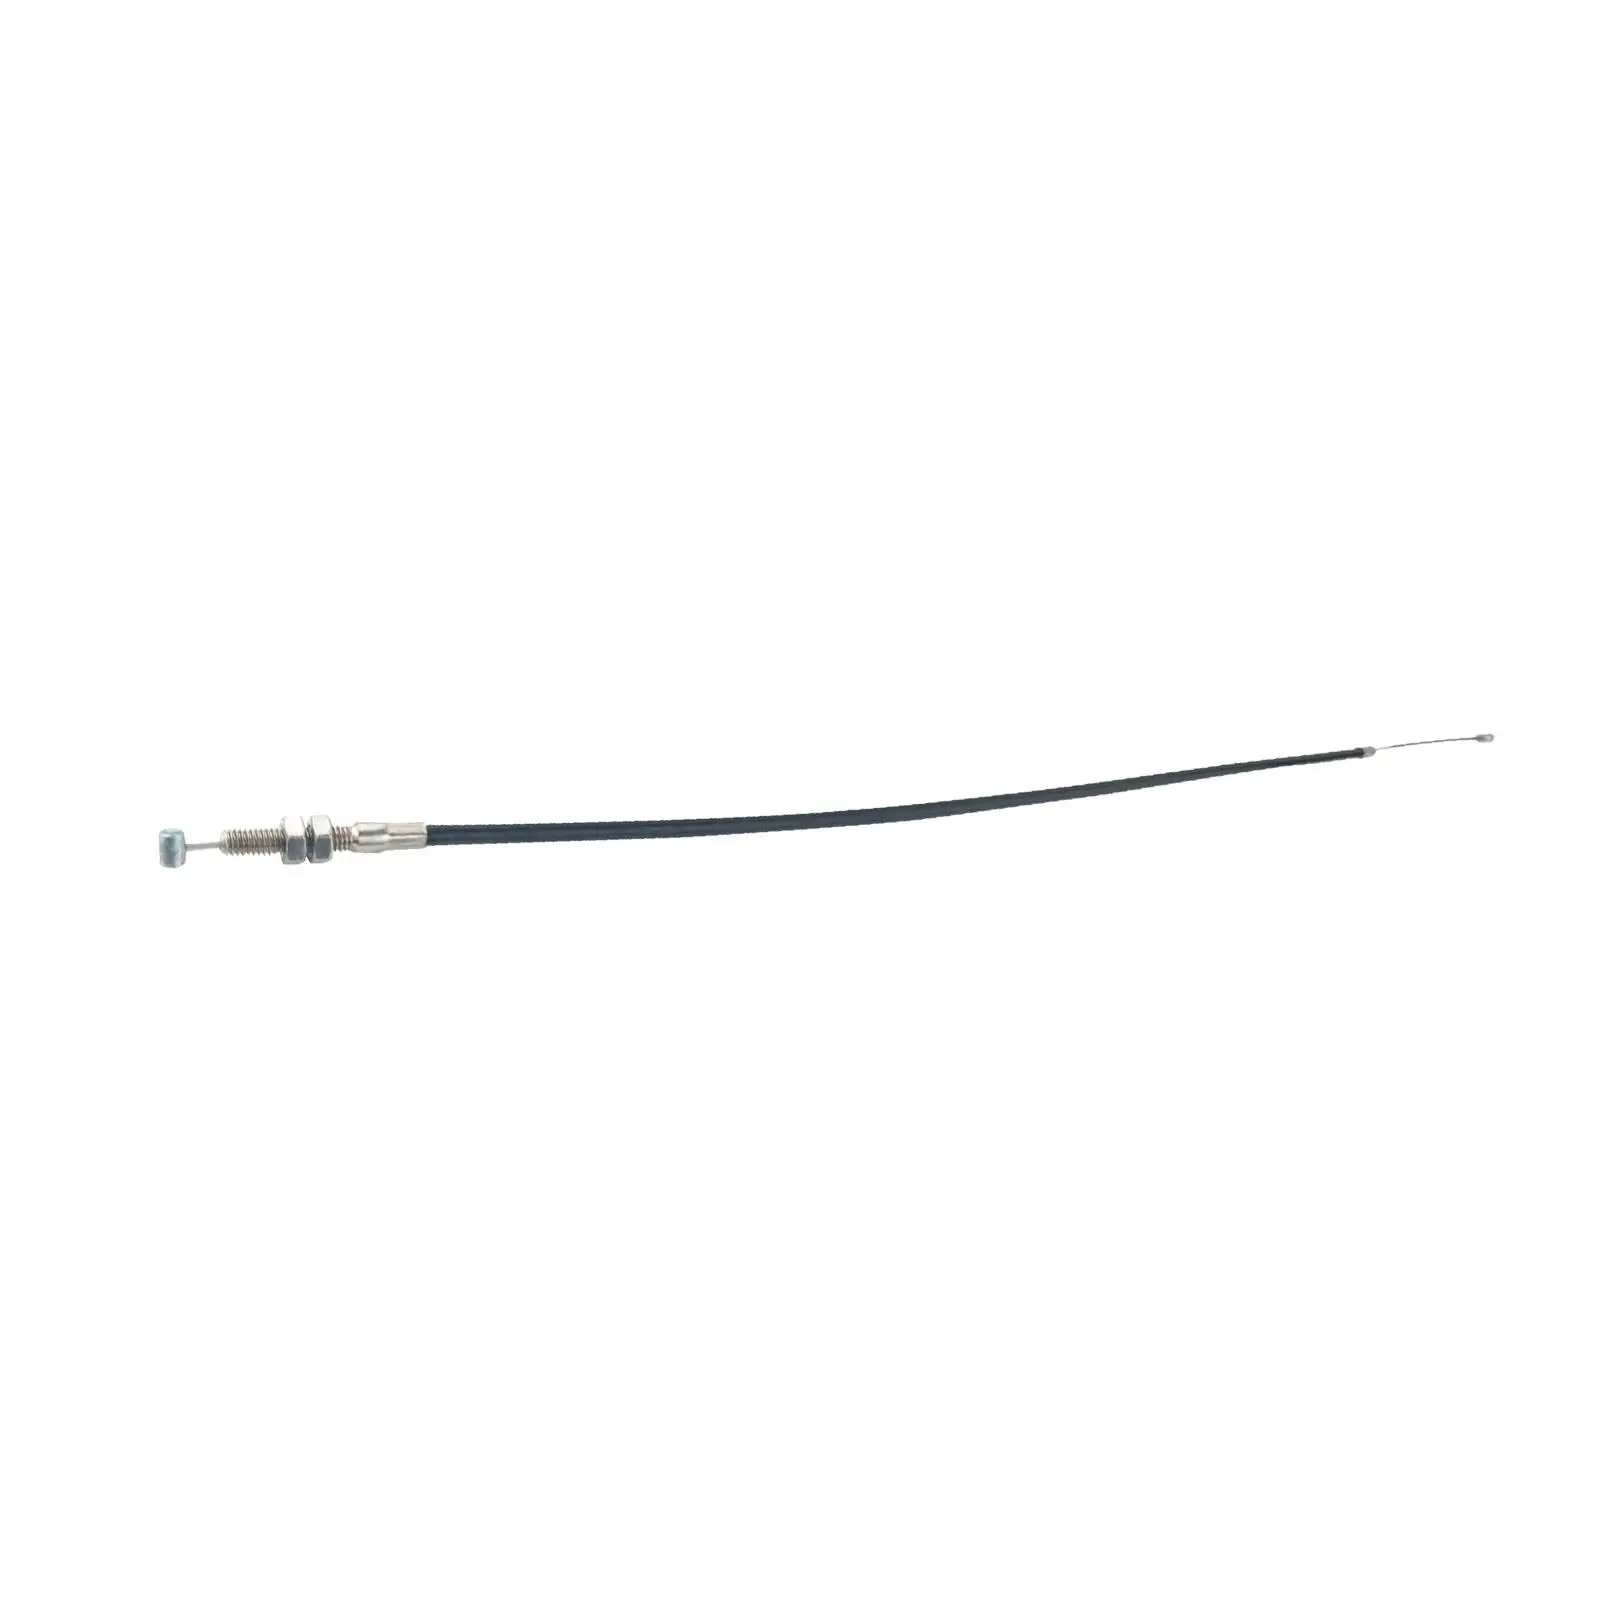 Throttle Cable 60cm 6AH-26311-00 Spare Parts for Yamaha Outboard 15HP 20HP Boat Engine Parts Professional Easy Installation